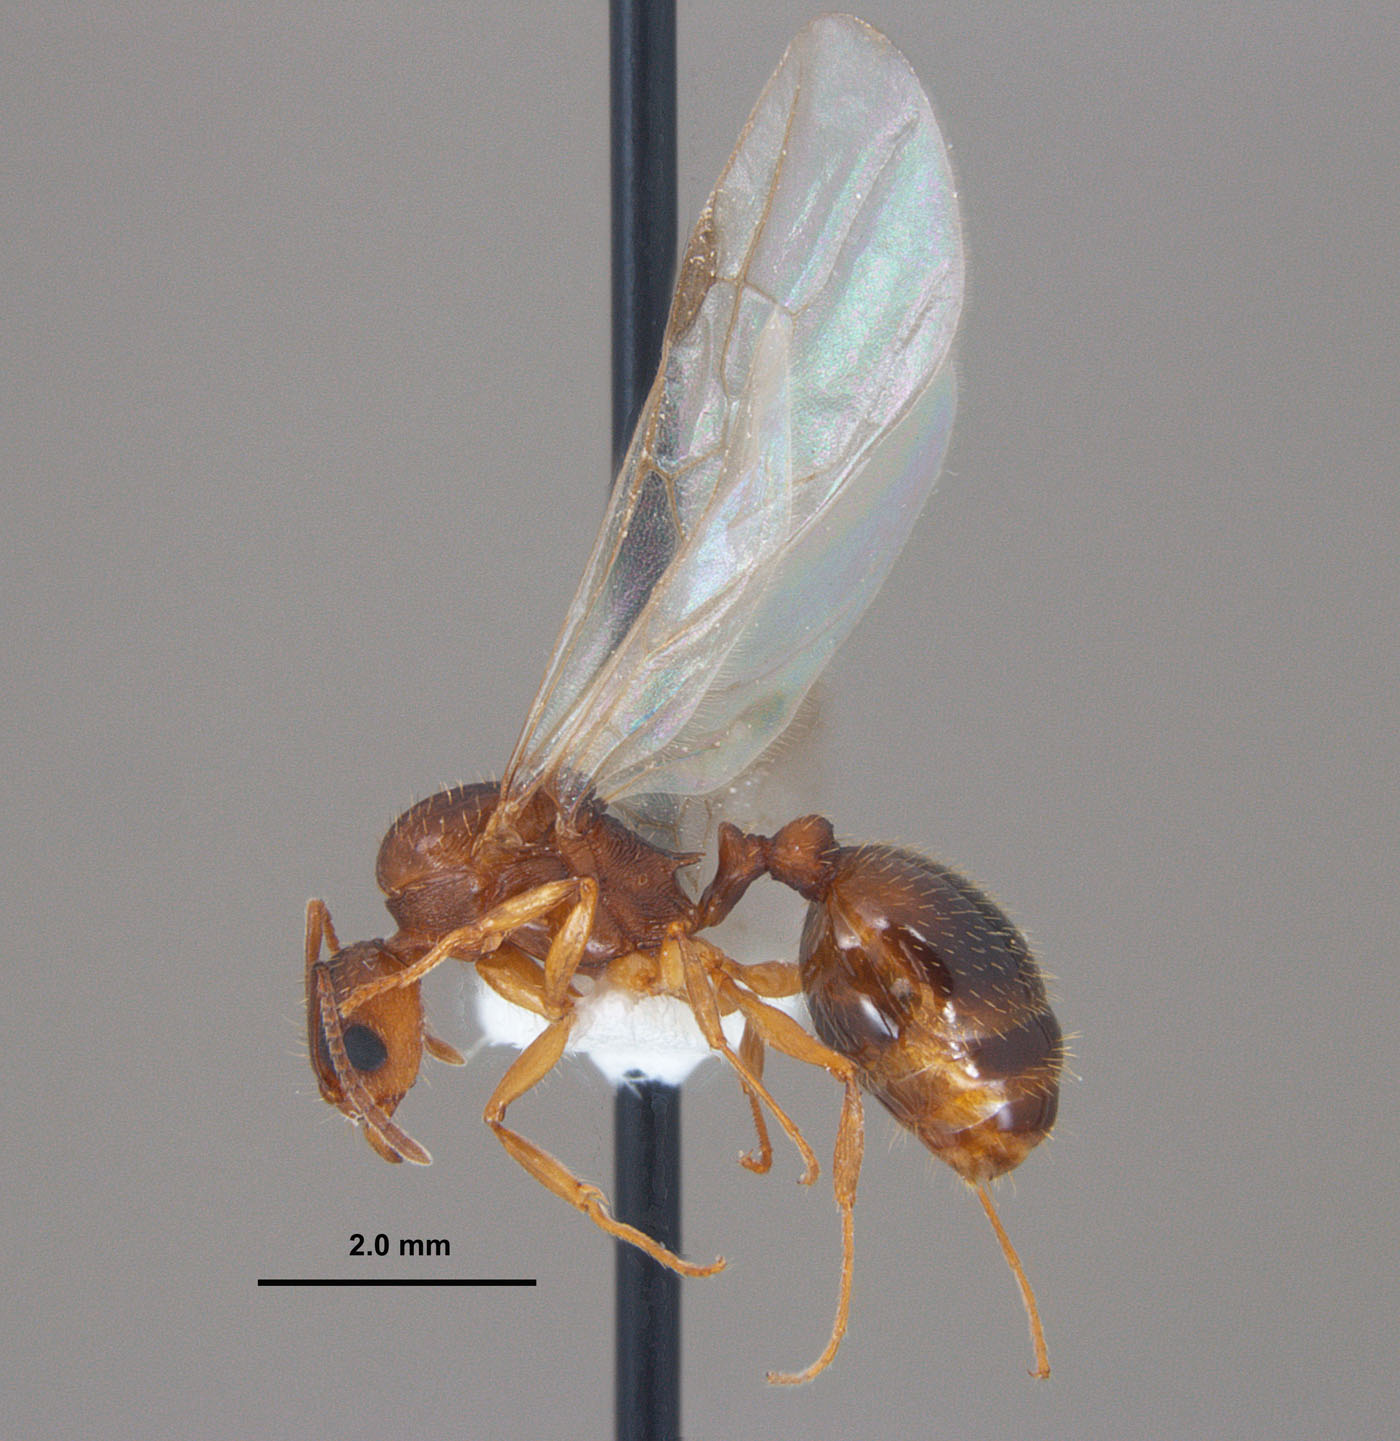 Aphaenogaster carolinensis lateral view of alate queen